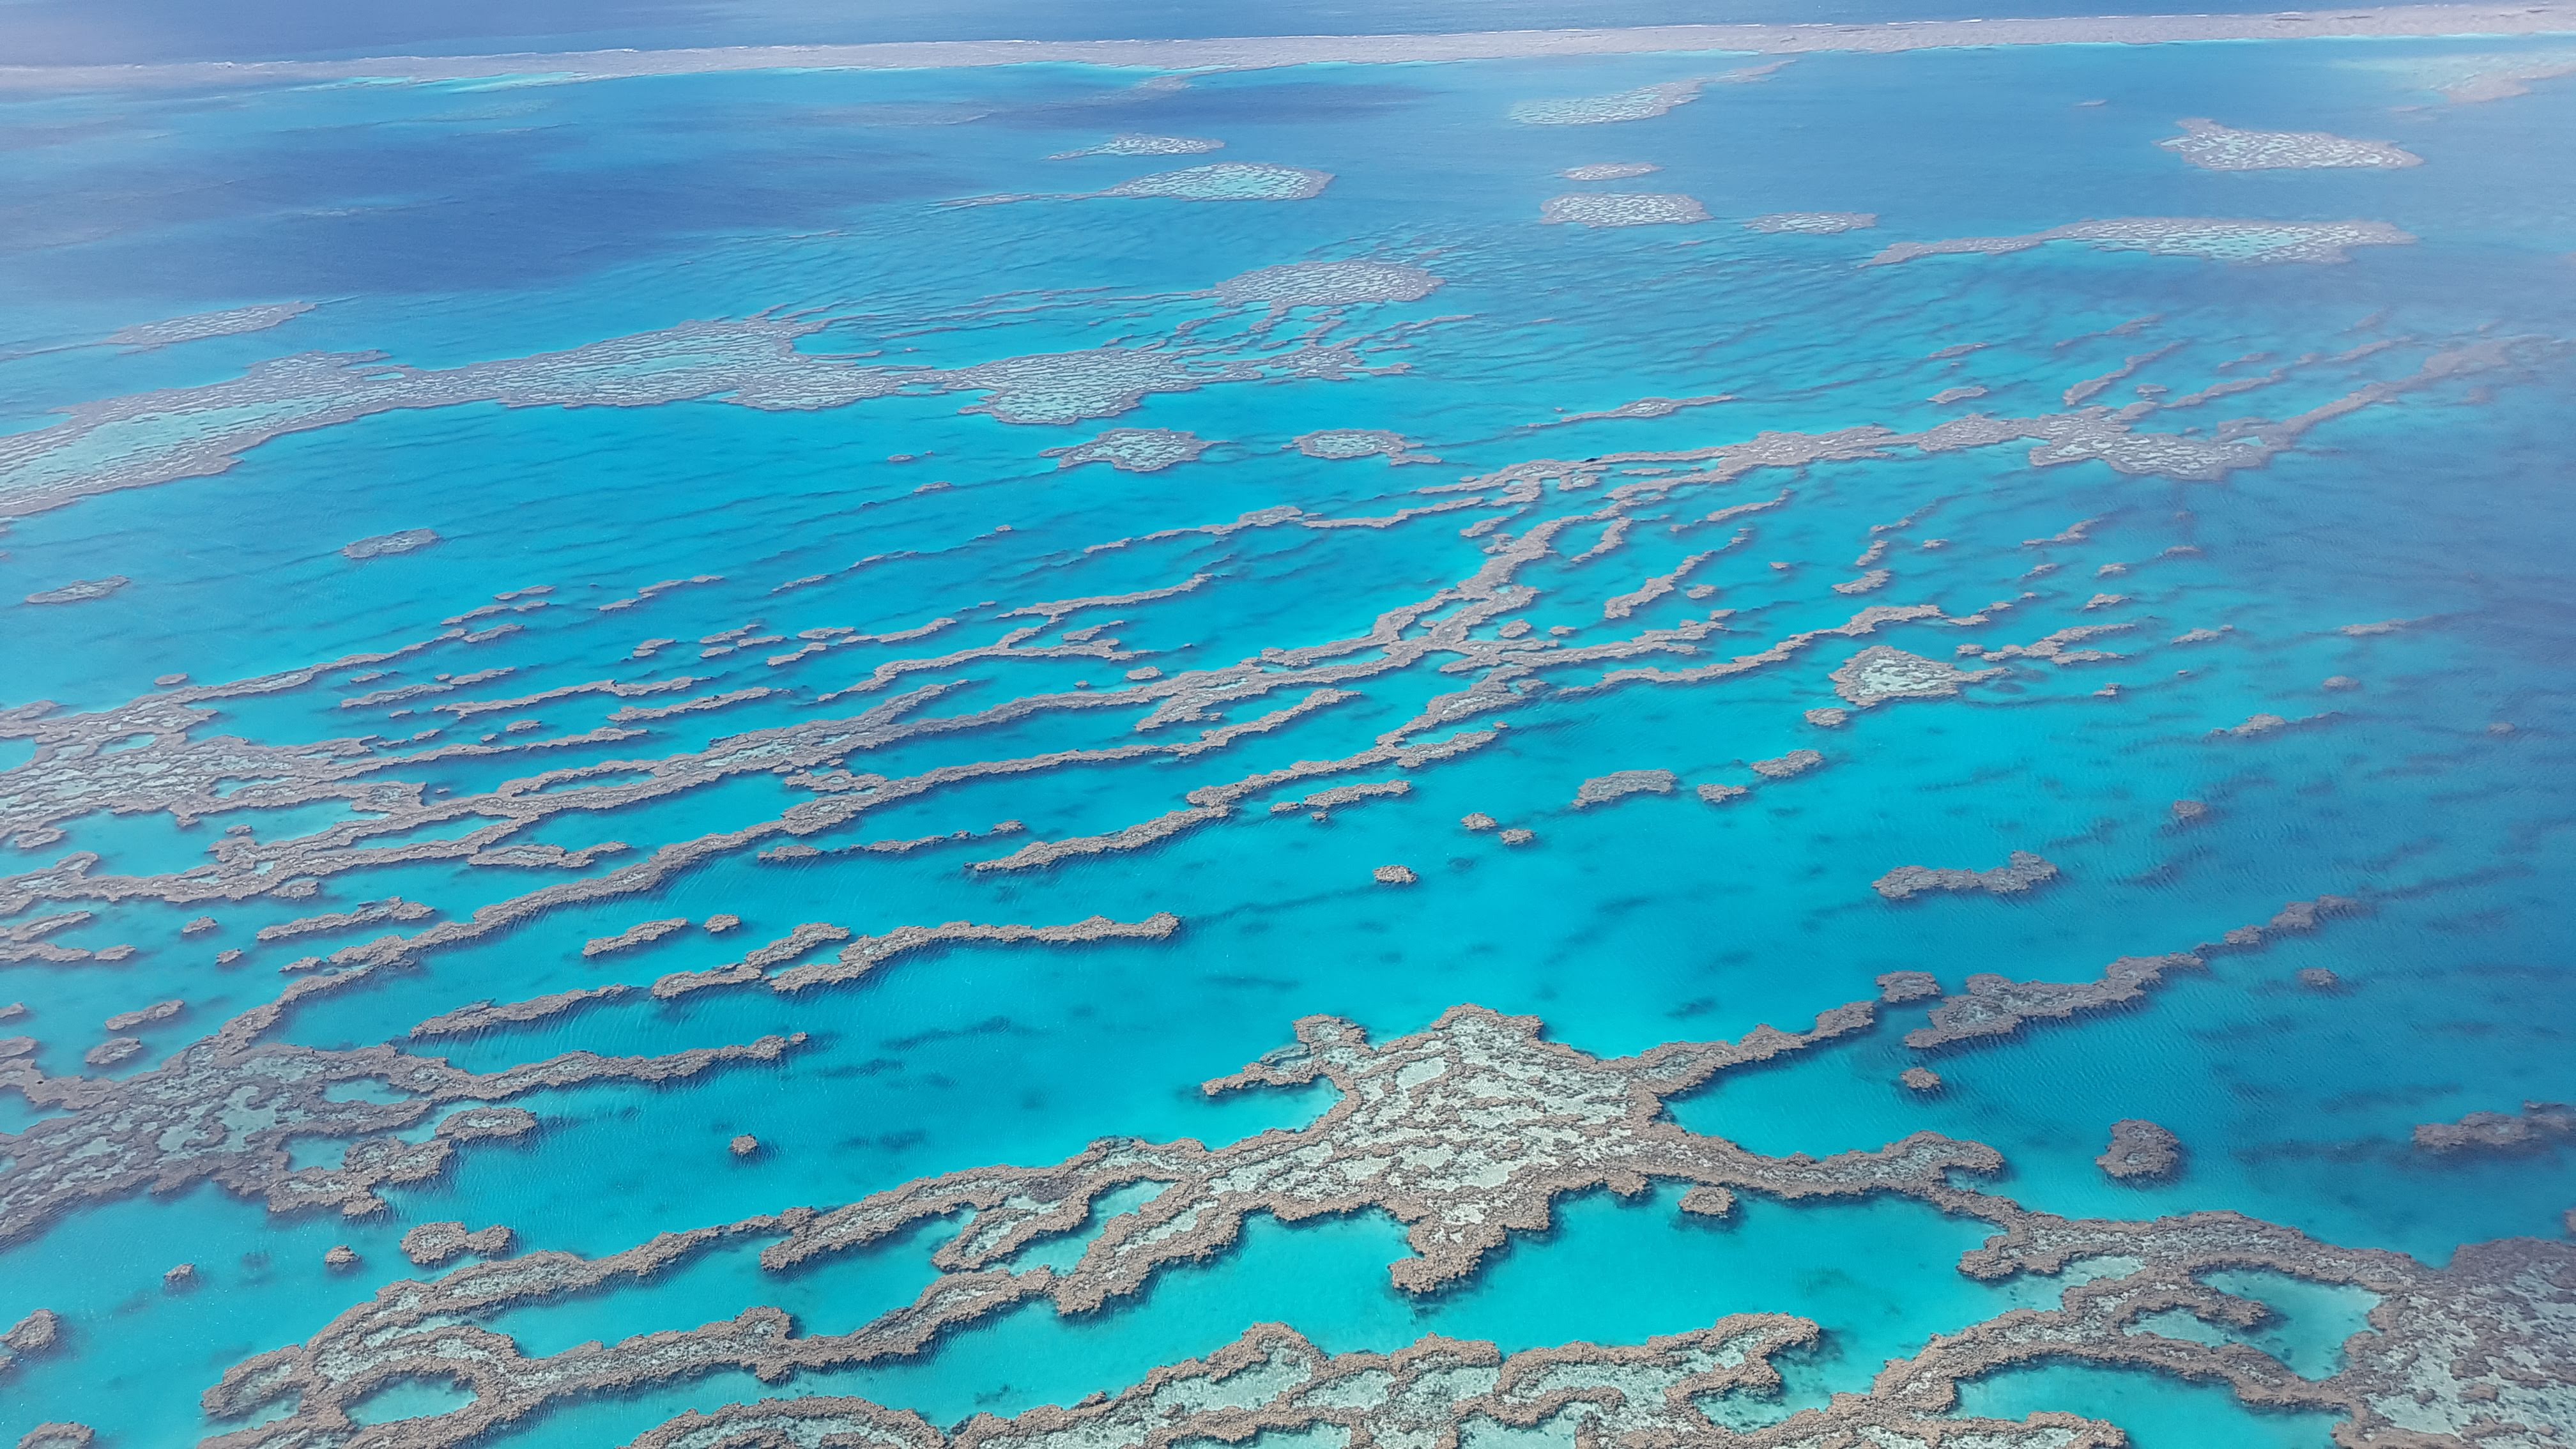 View from my window when flying over the Great Barrier Reef